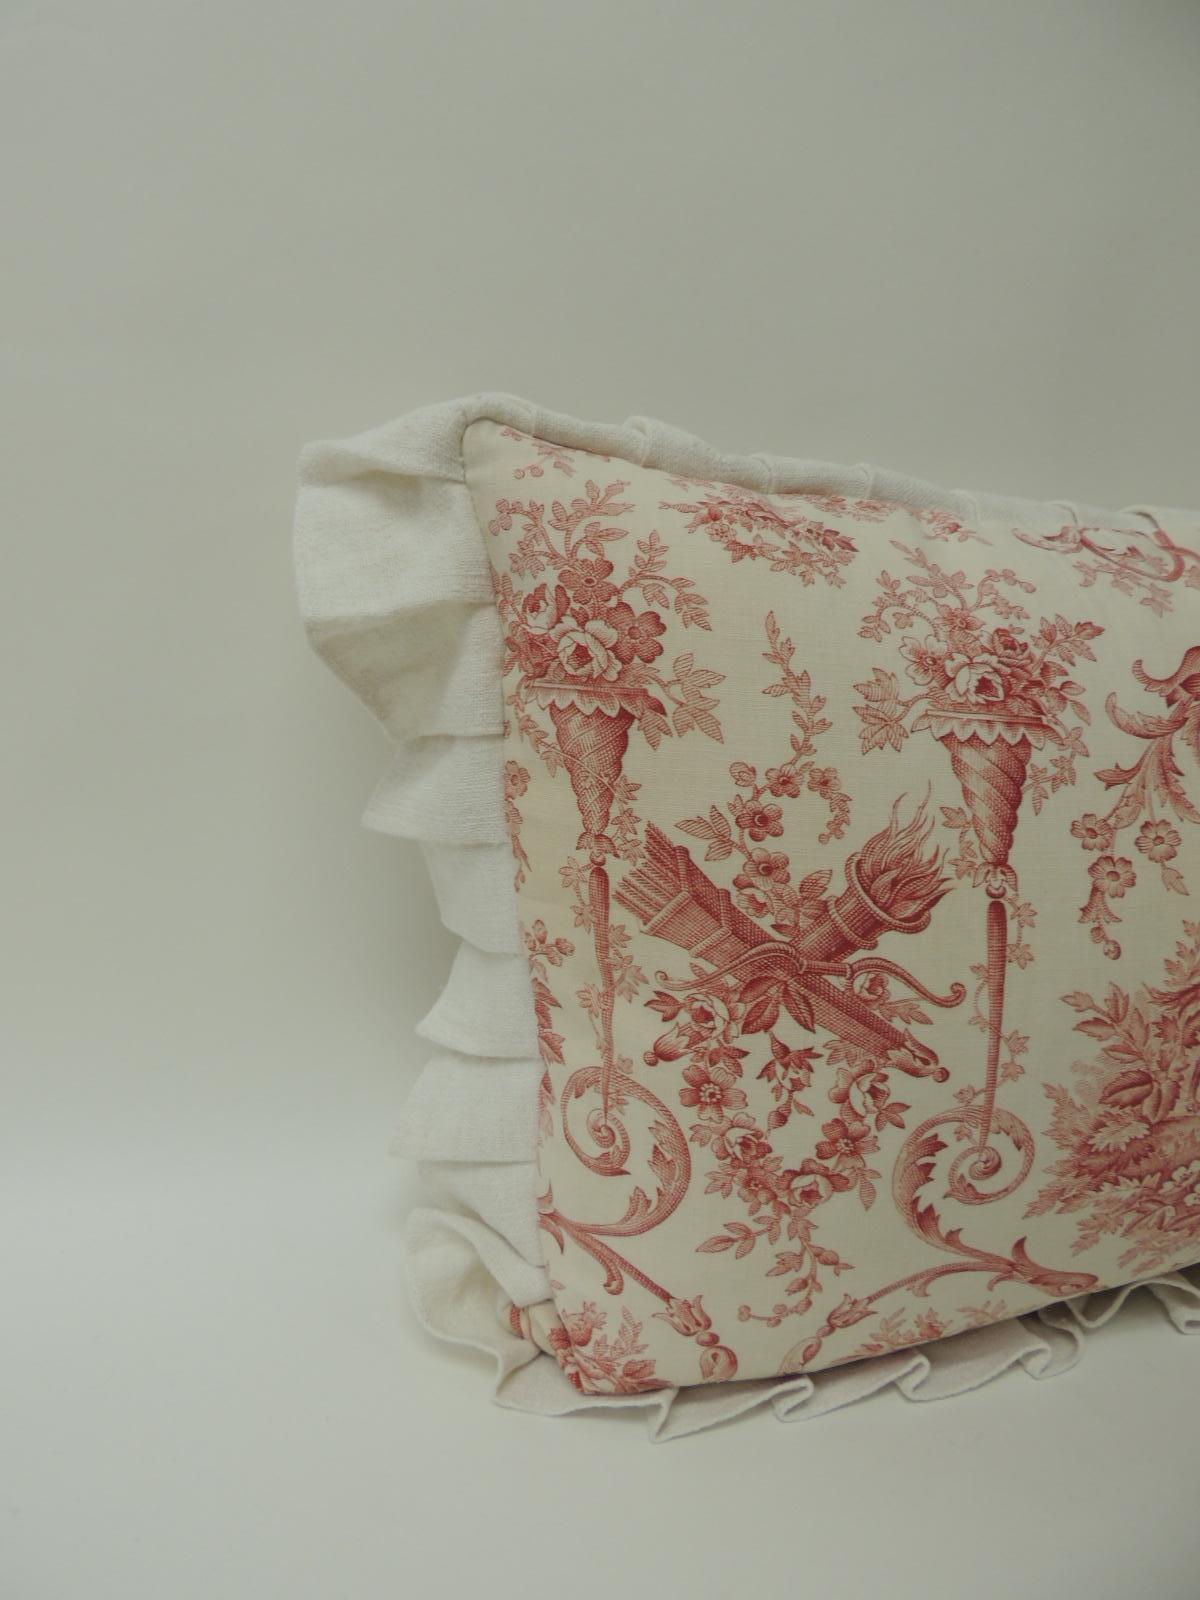 Antique French Provincial Toile decorative bolster pillow with Grain Sack ruffles
Antique red and white decorative Toile bolster pillow. Accent pillow framed with an antique homespun linen and the Classic custom flat ruffle pleats all around. The